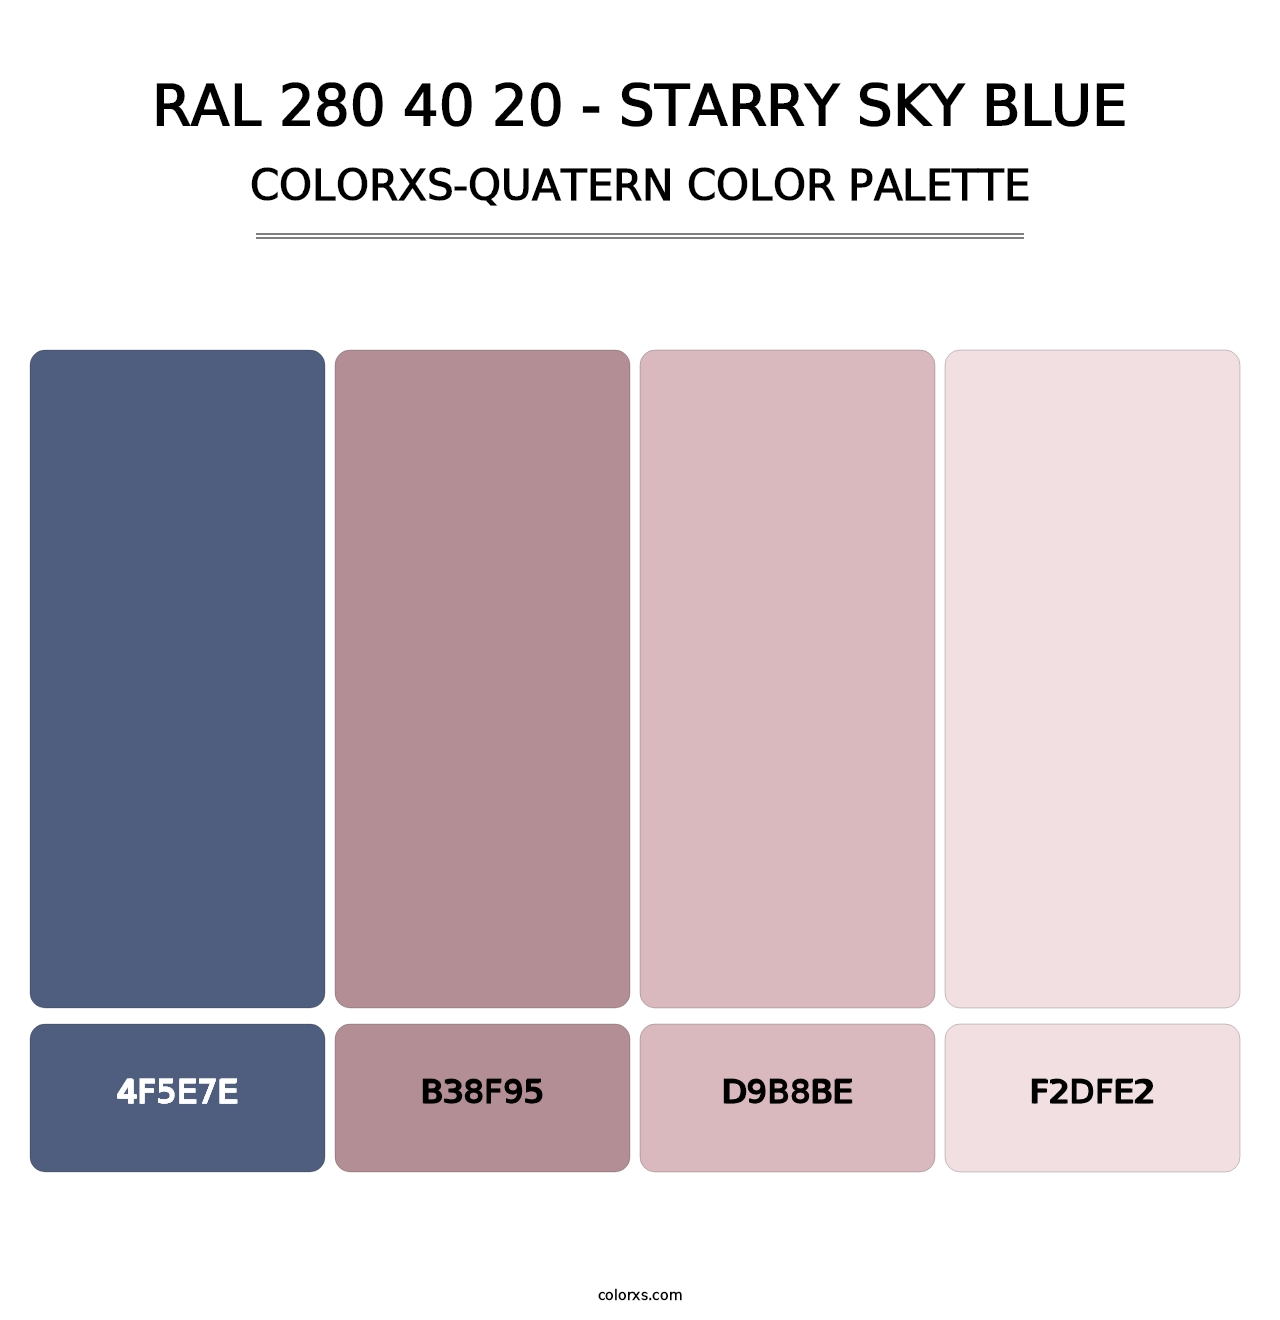 RAL 280 40 20 - Starry Sky Blue - Colorxs Quatern Palette